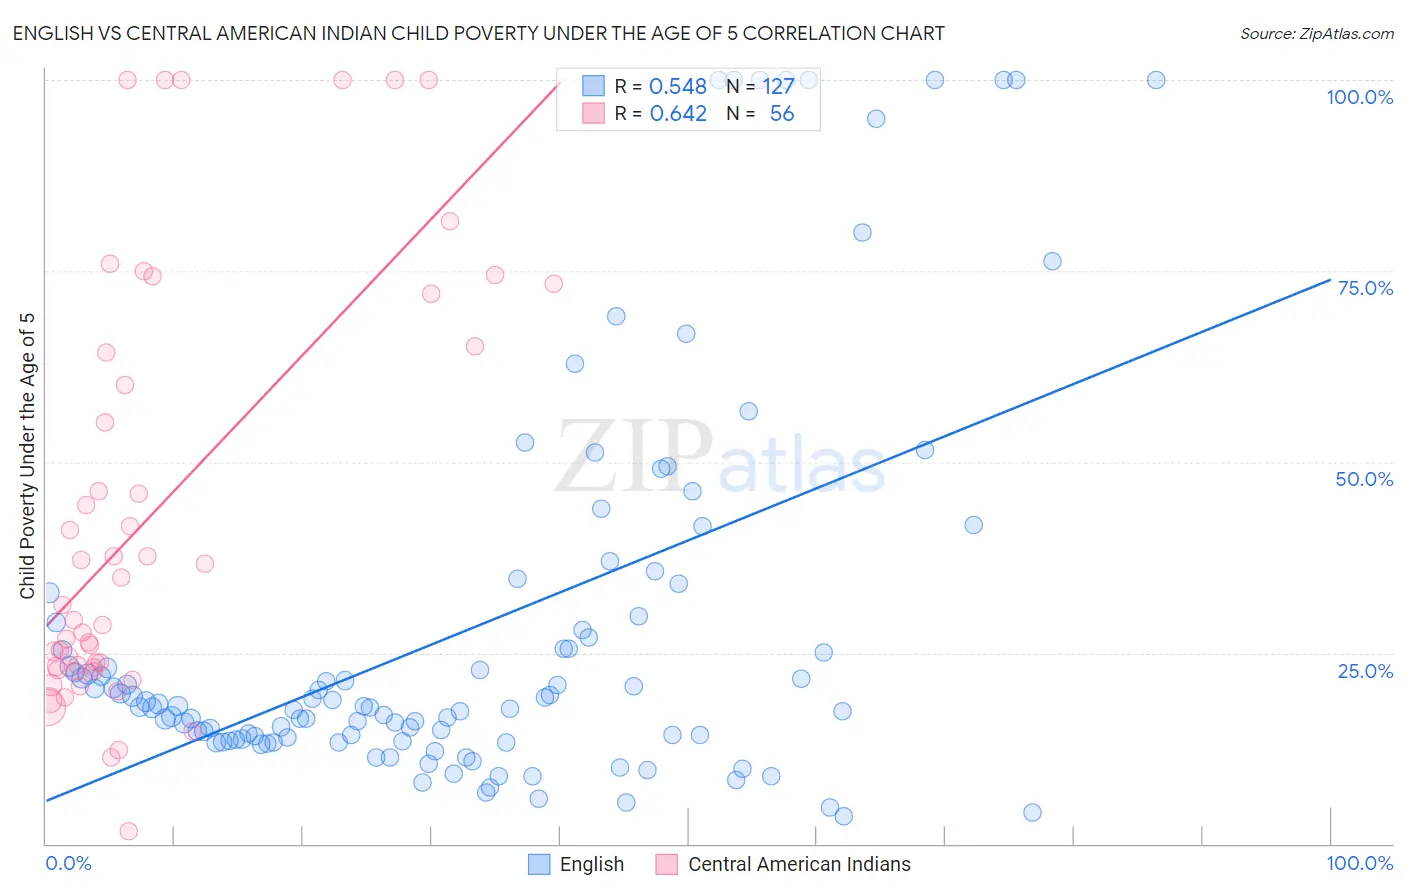 English vs Central American Indian Child Poverty Under the Age of 5